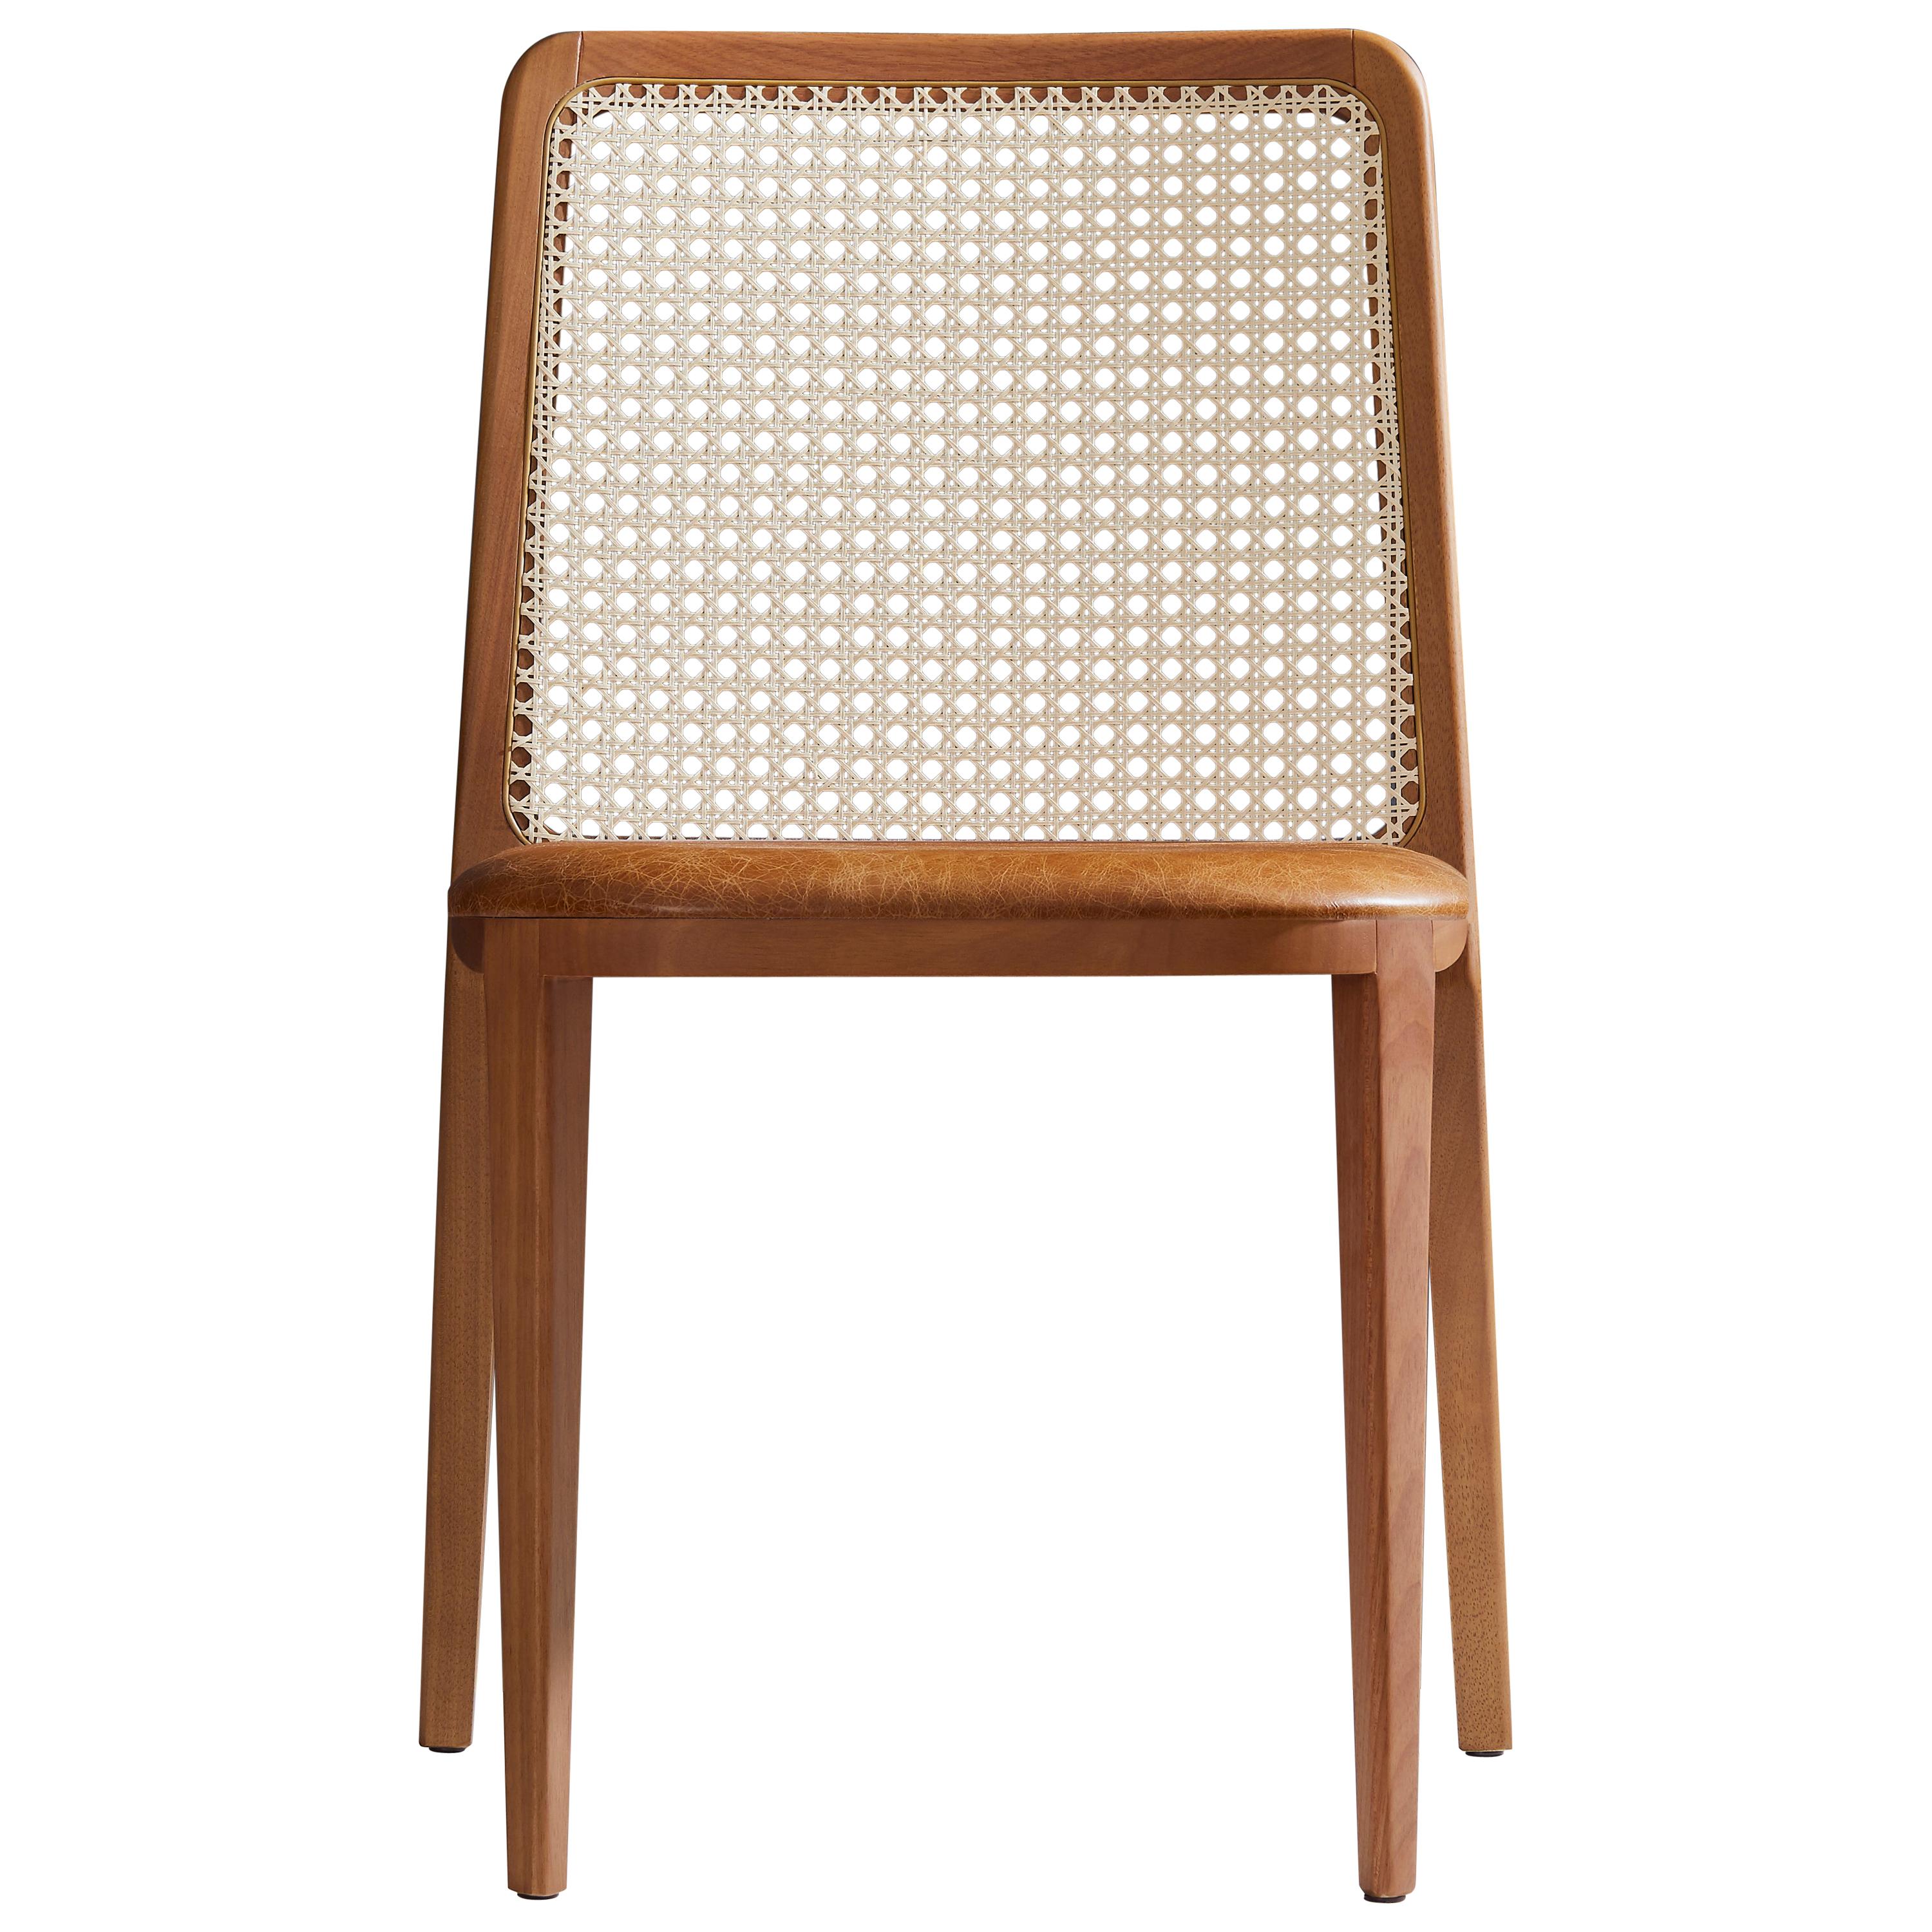 Minimal Style, Solid Wood Chair, Leather Seating, Caning Backboard